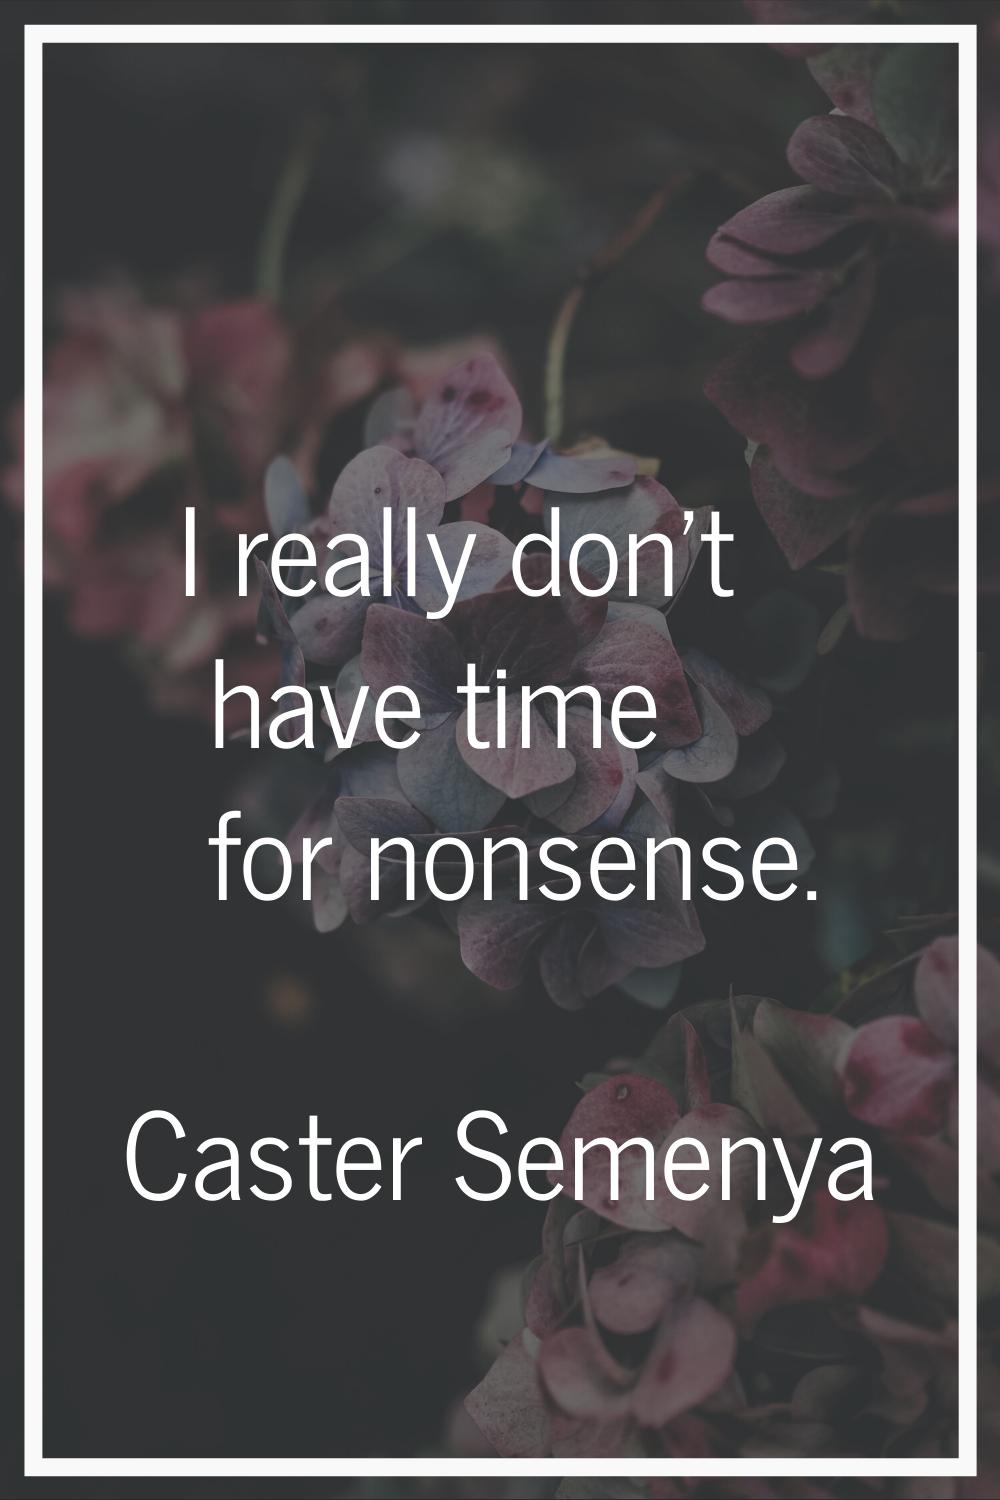 I really don't have time for nonsense.